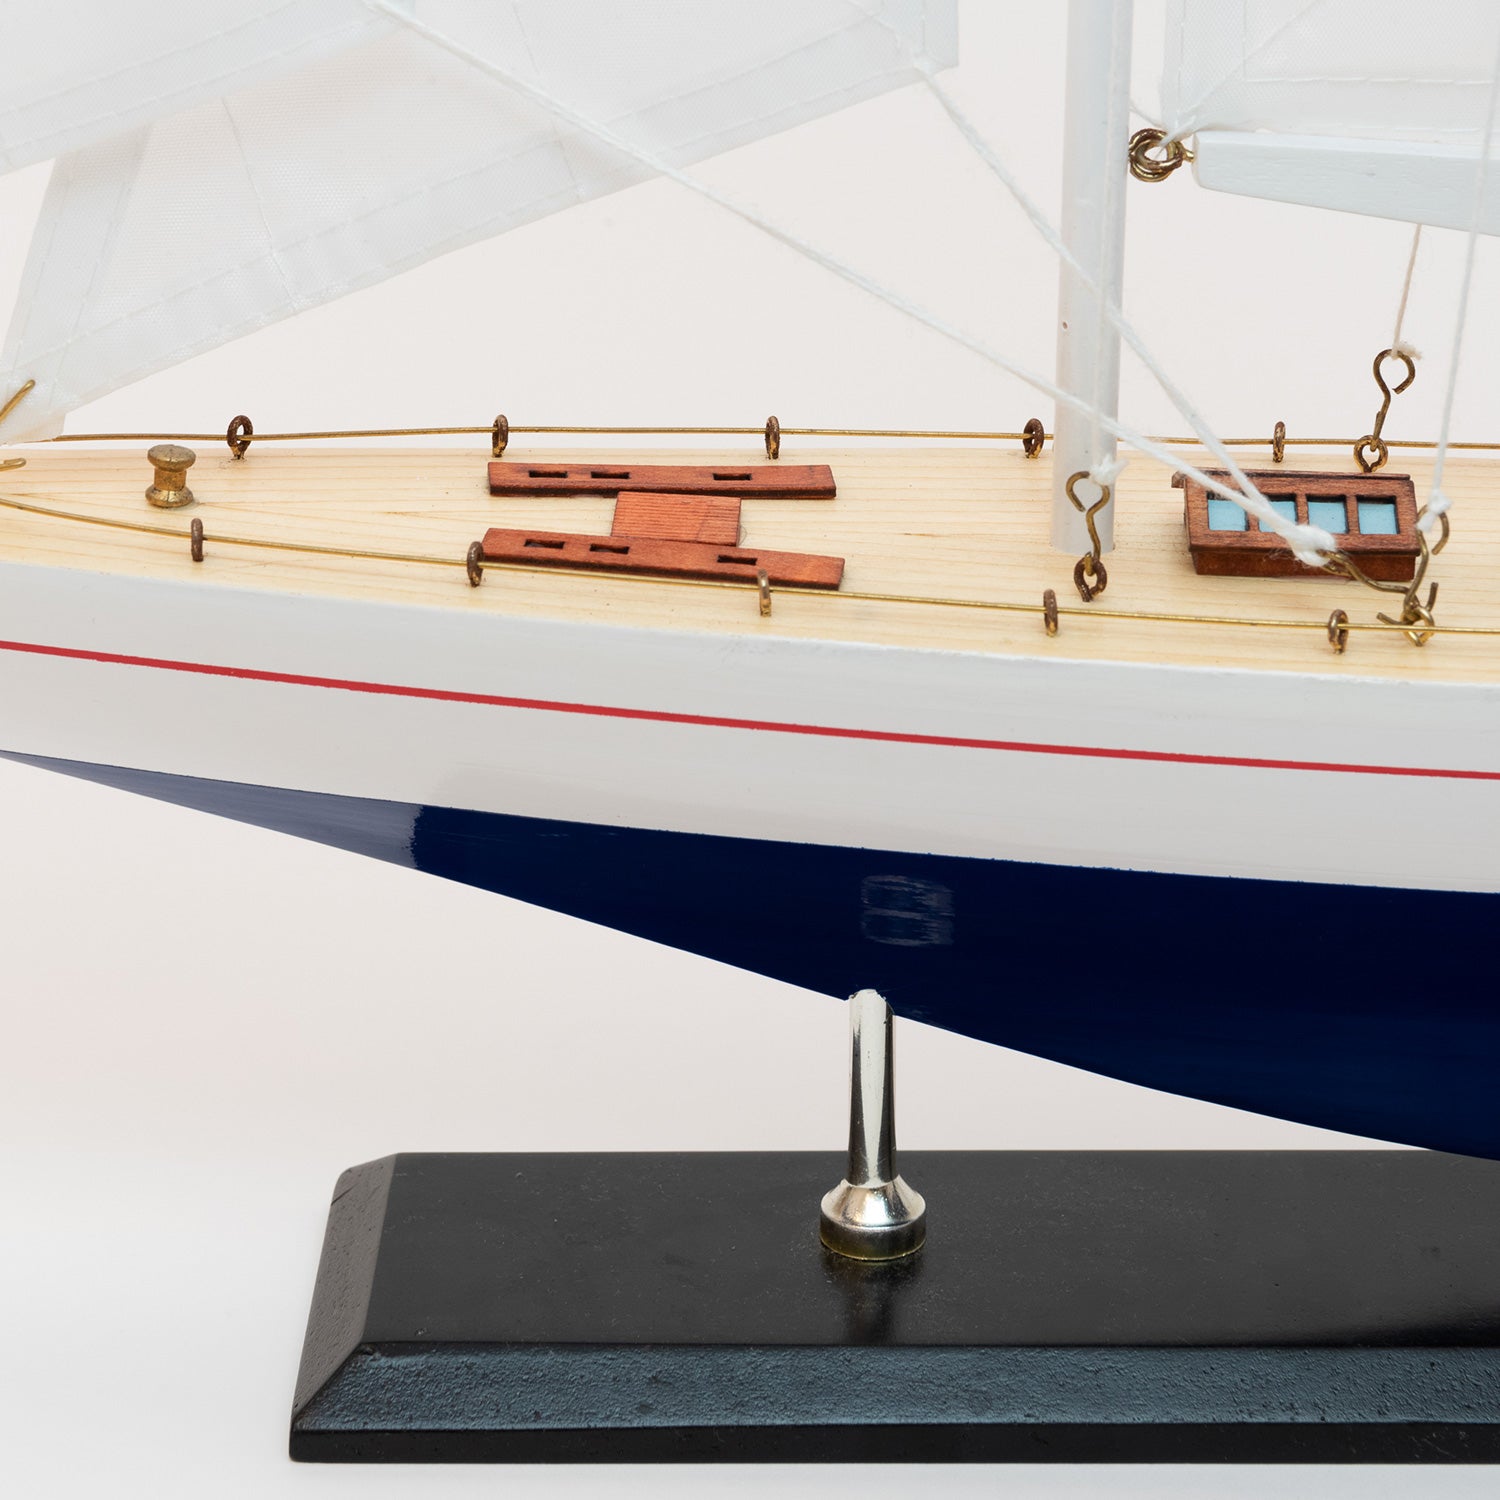 View of the Model J Class Yacht's bow with white sails and a blue and white hull.